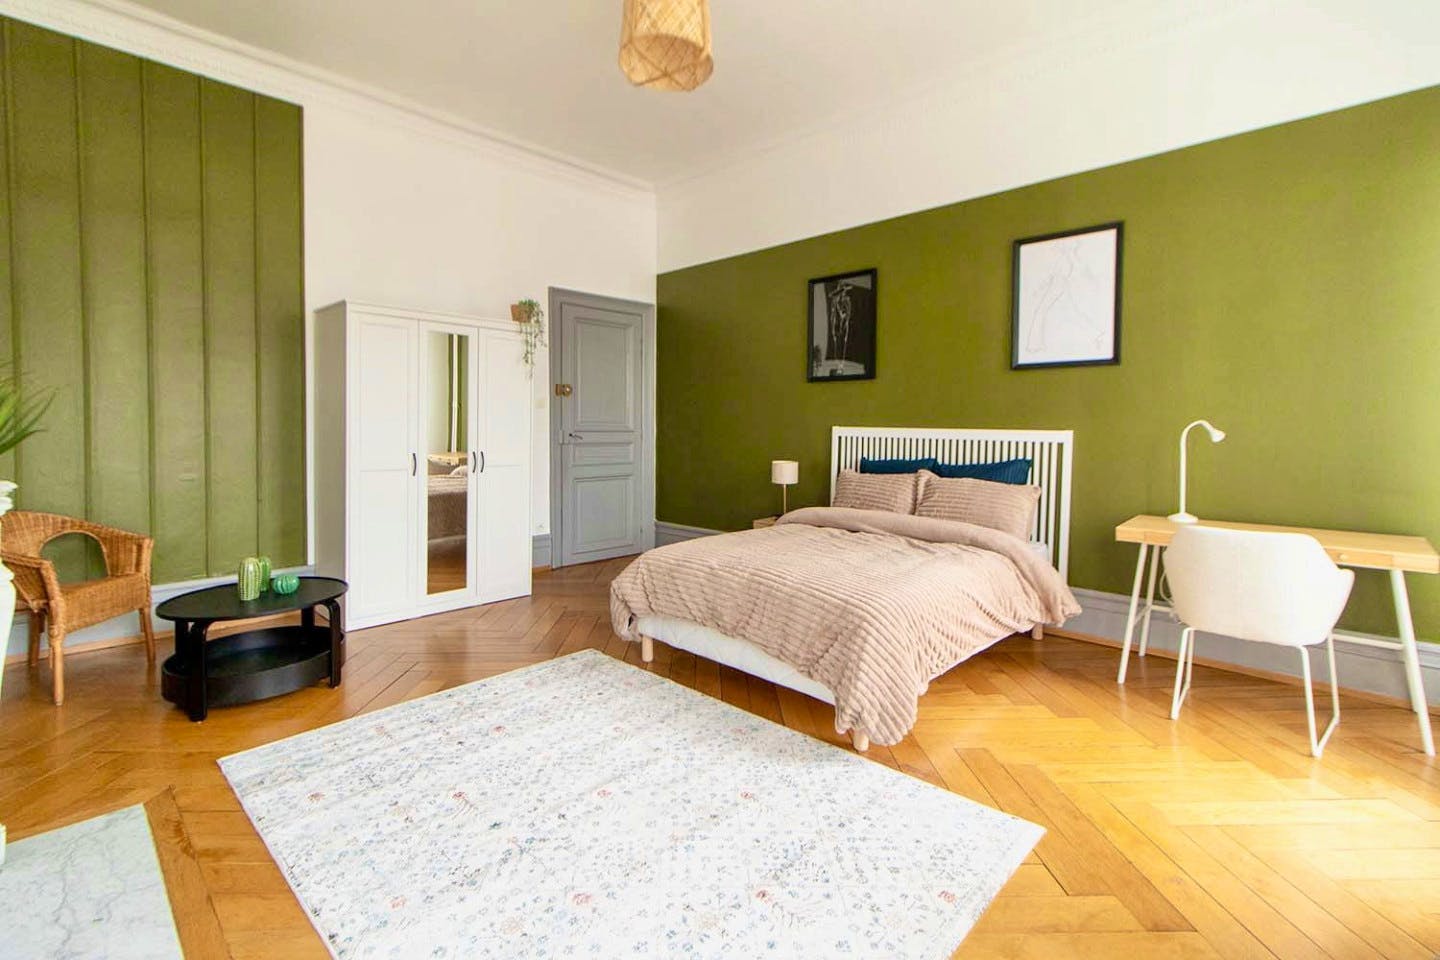 Gorgeous coliving apartment in the heart of Strasbourg